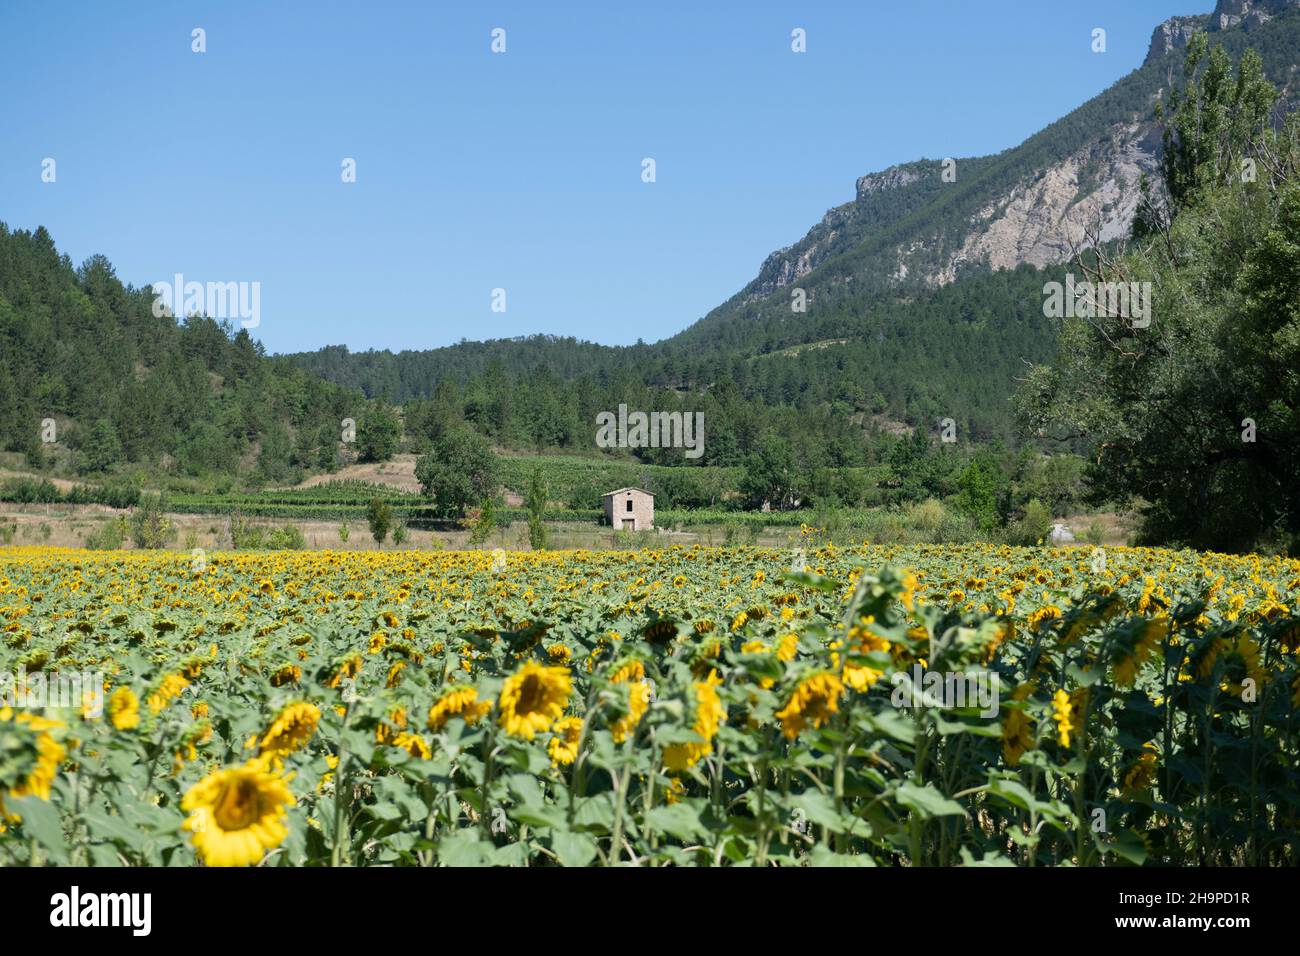 Field of sunflowers in Chatillon-en-Diois (south-eastern France) with a hut in the middle of vines in the background Stock Photo